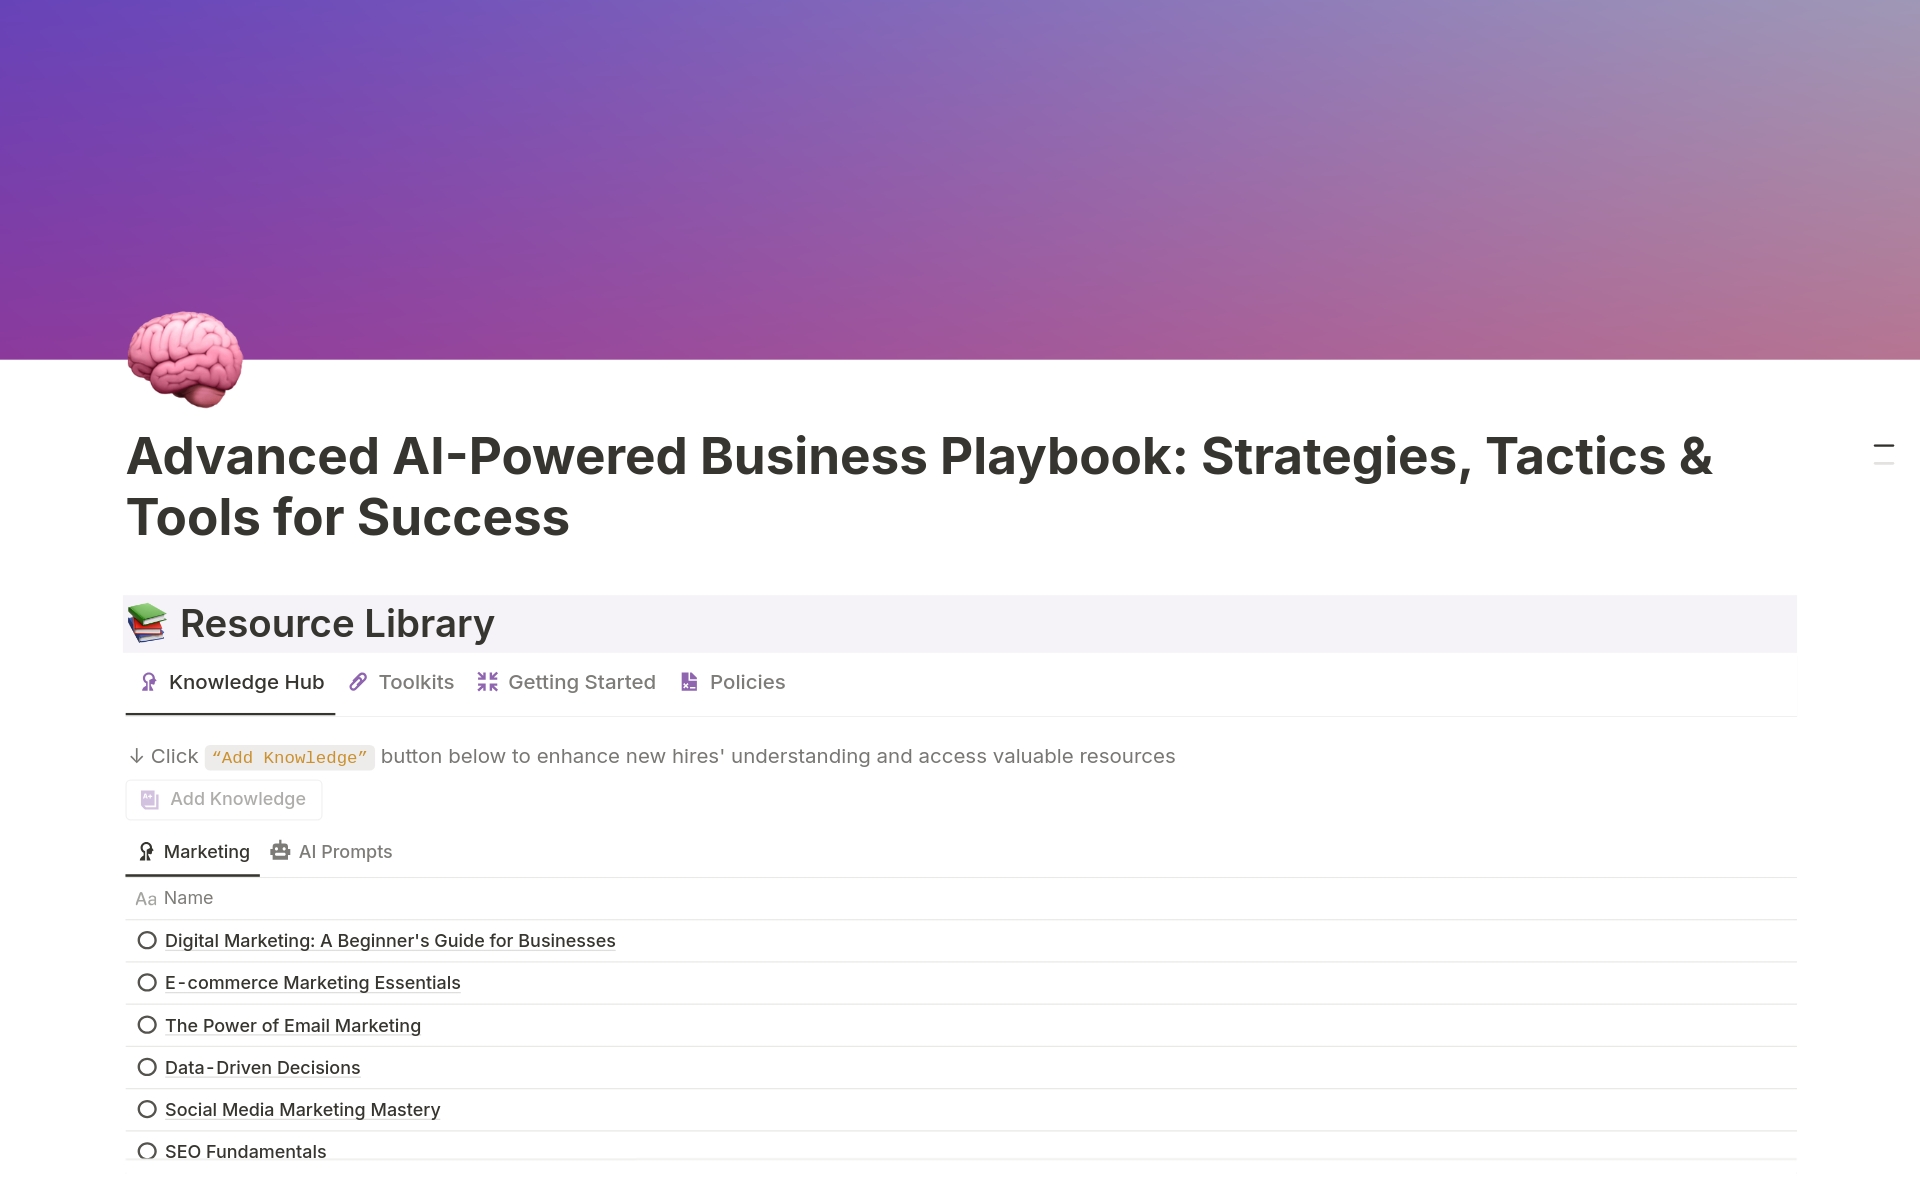 Comprehensive guide packed with strategic frameworks, tactical blueprints, and AI-powered tools:
✓ 10+ Free Applications
✓ 5+ Onboarding Documents for Employees
✓ 10+ Pre-Drafted Policies for Employees
✓ 20+ Proven Marketing Frameworks
✓ 20+ AI Prompts for Effective Campaigns